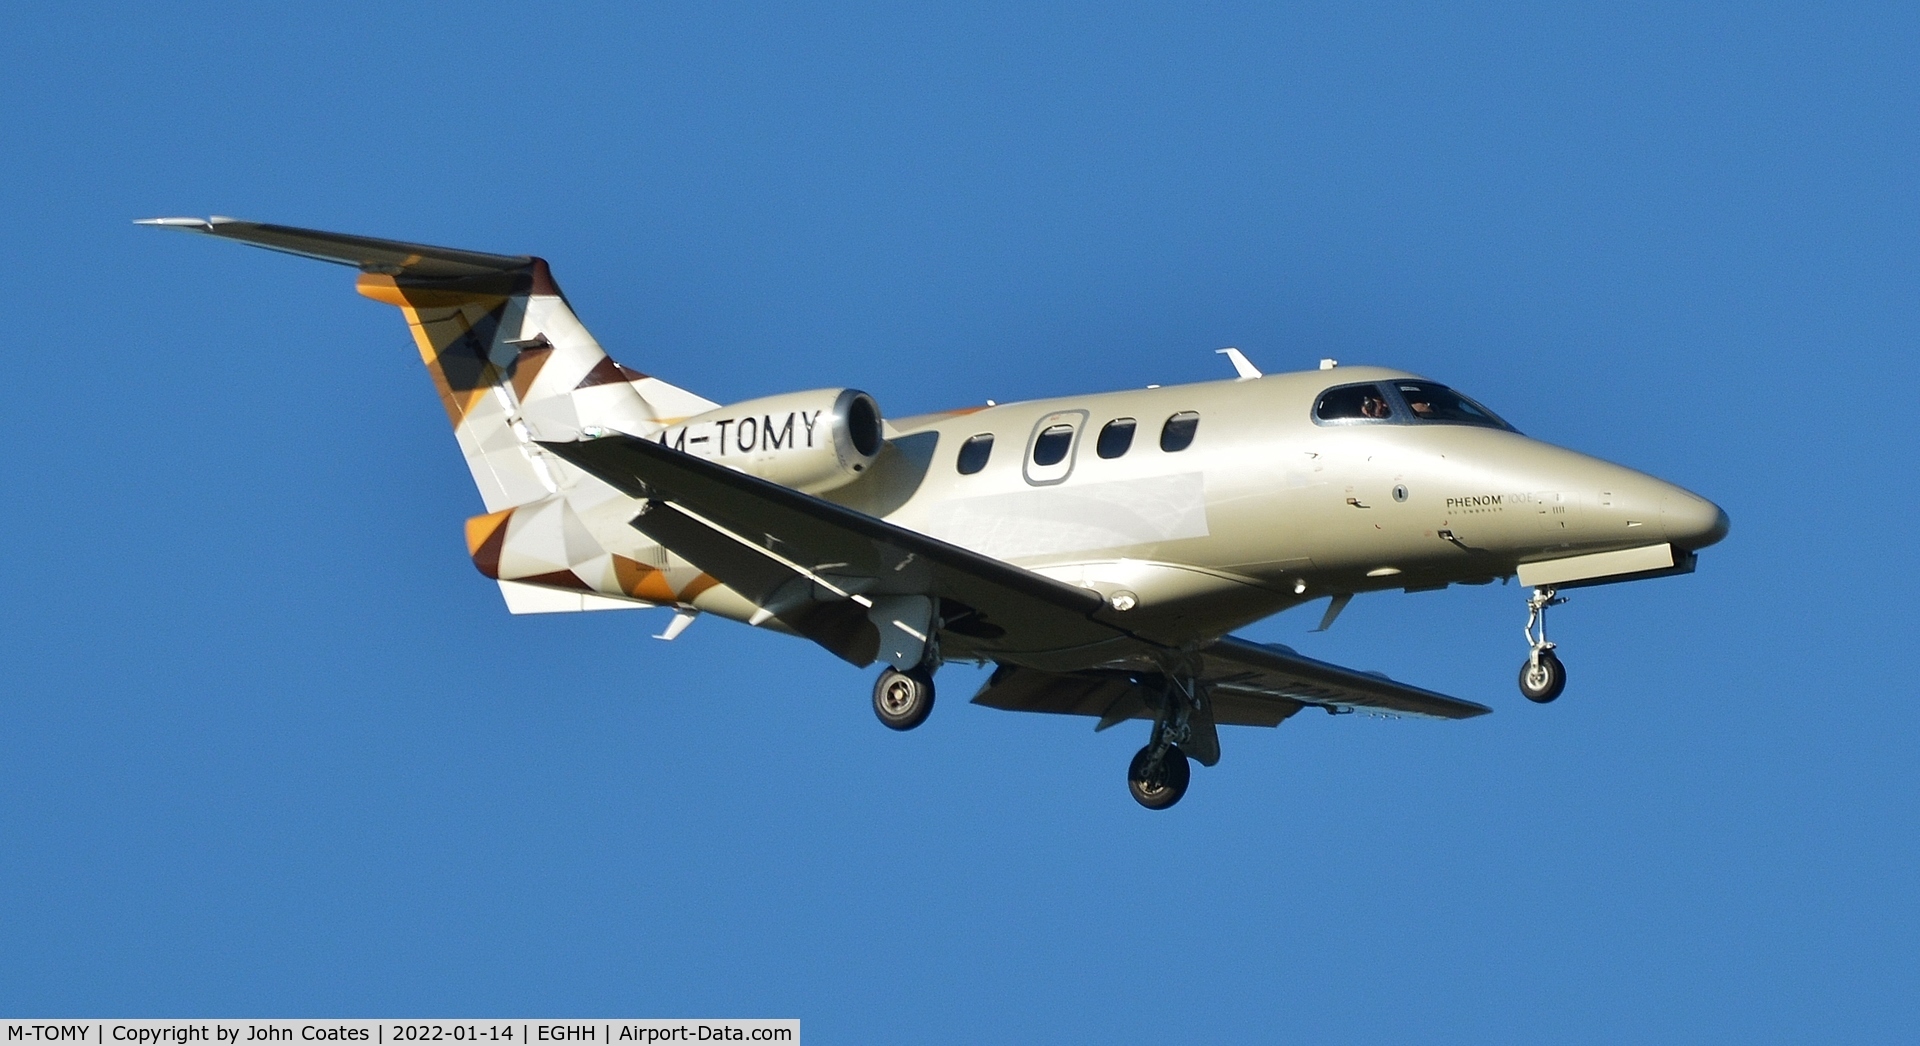 M-TOMY, 2016 Embraer EMB-500 Phenom 100 C/N 50000371, On approach to 08